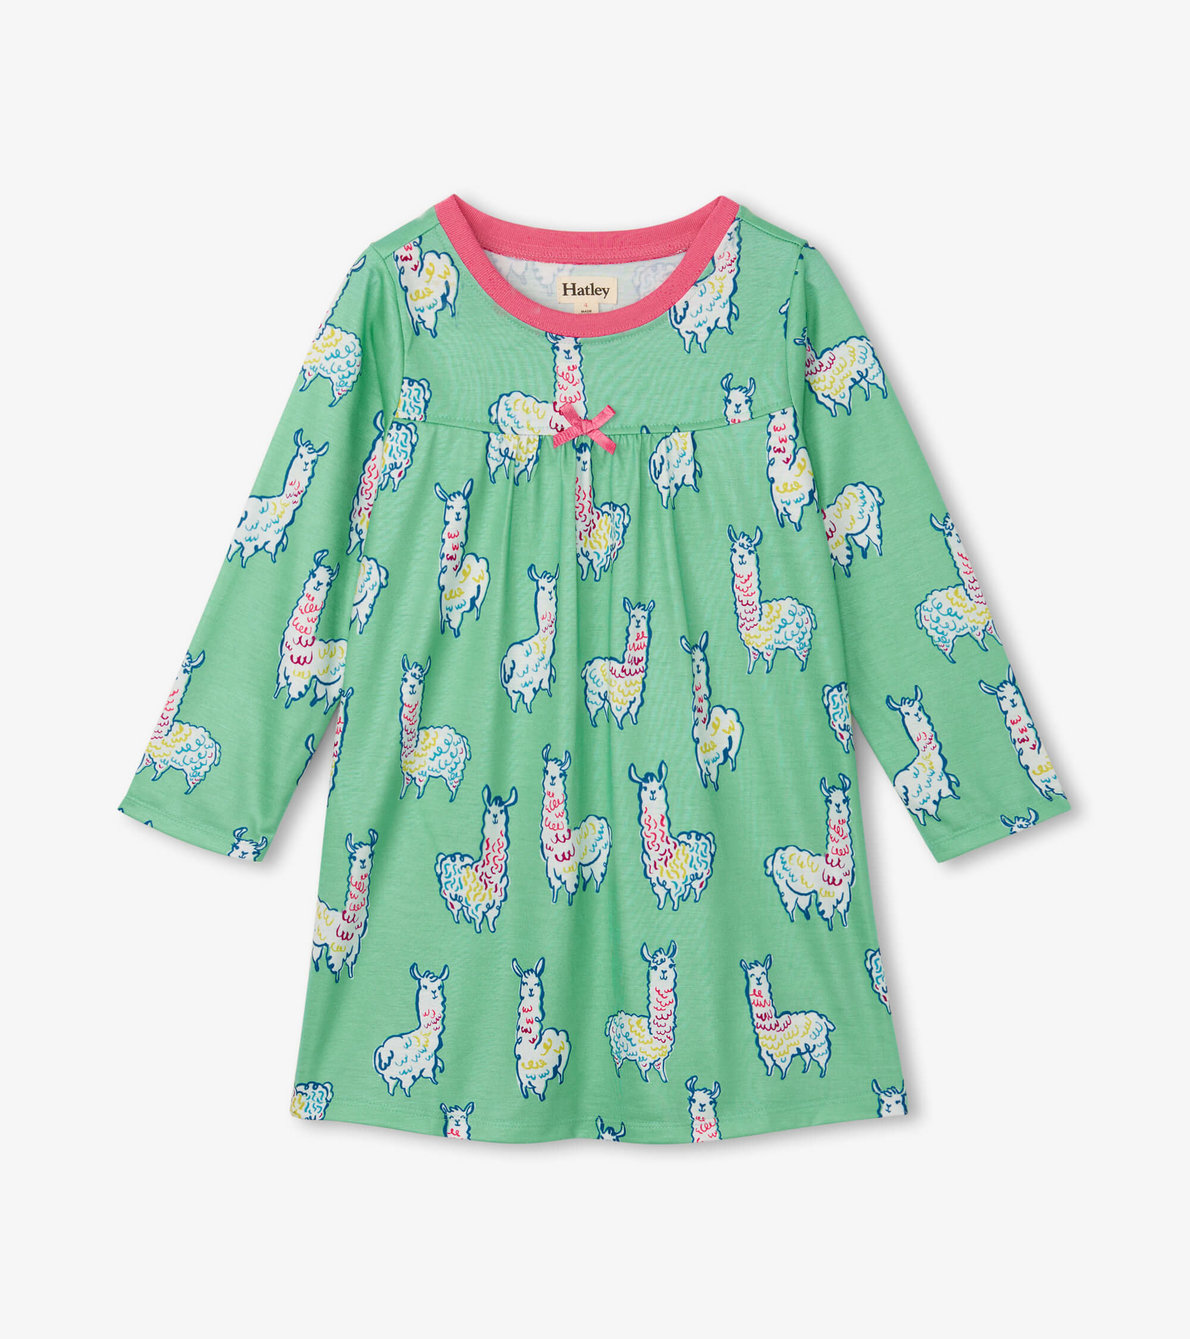 View larger image of Adorable Alpacas Long Sleeve Nightdress